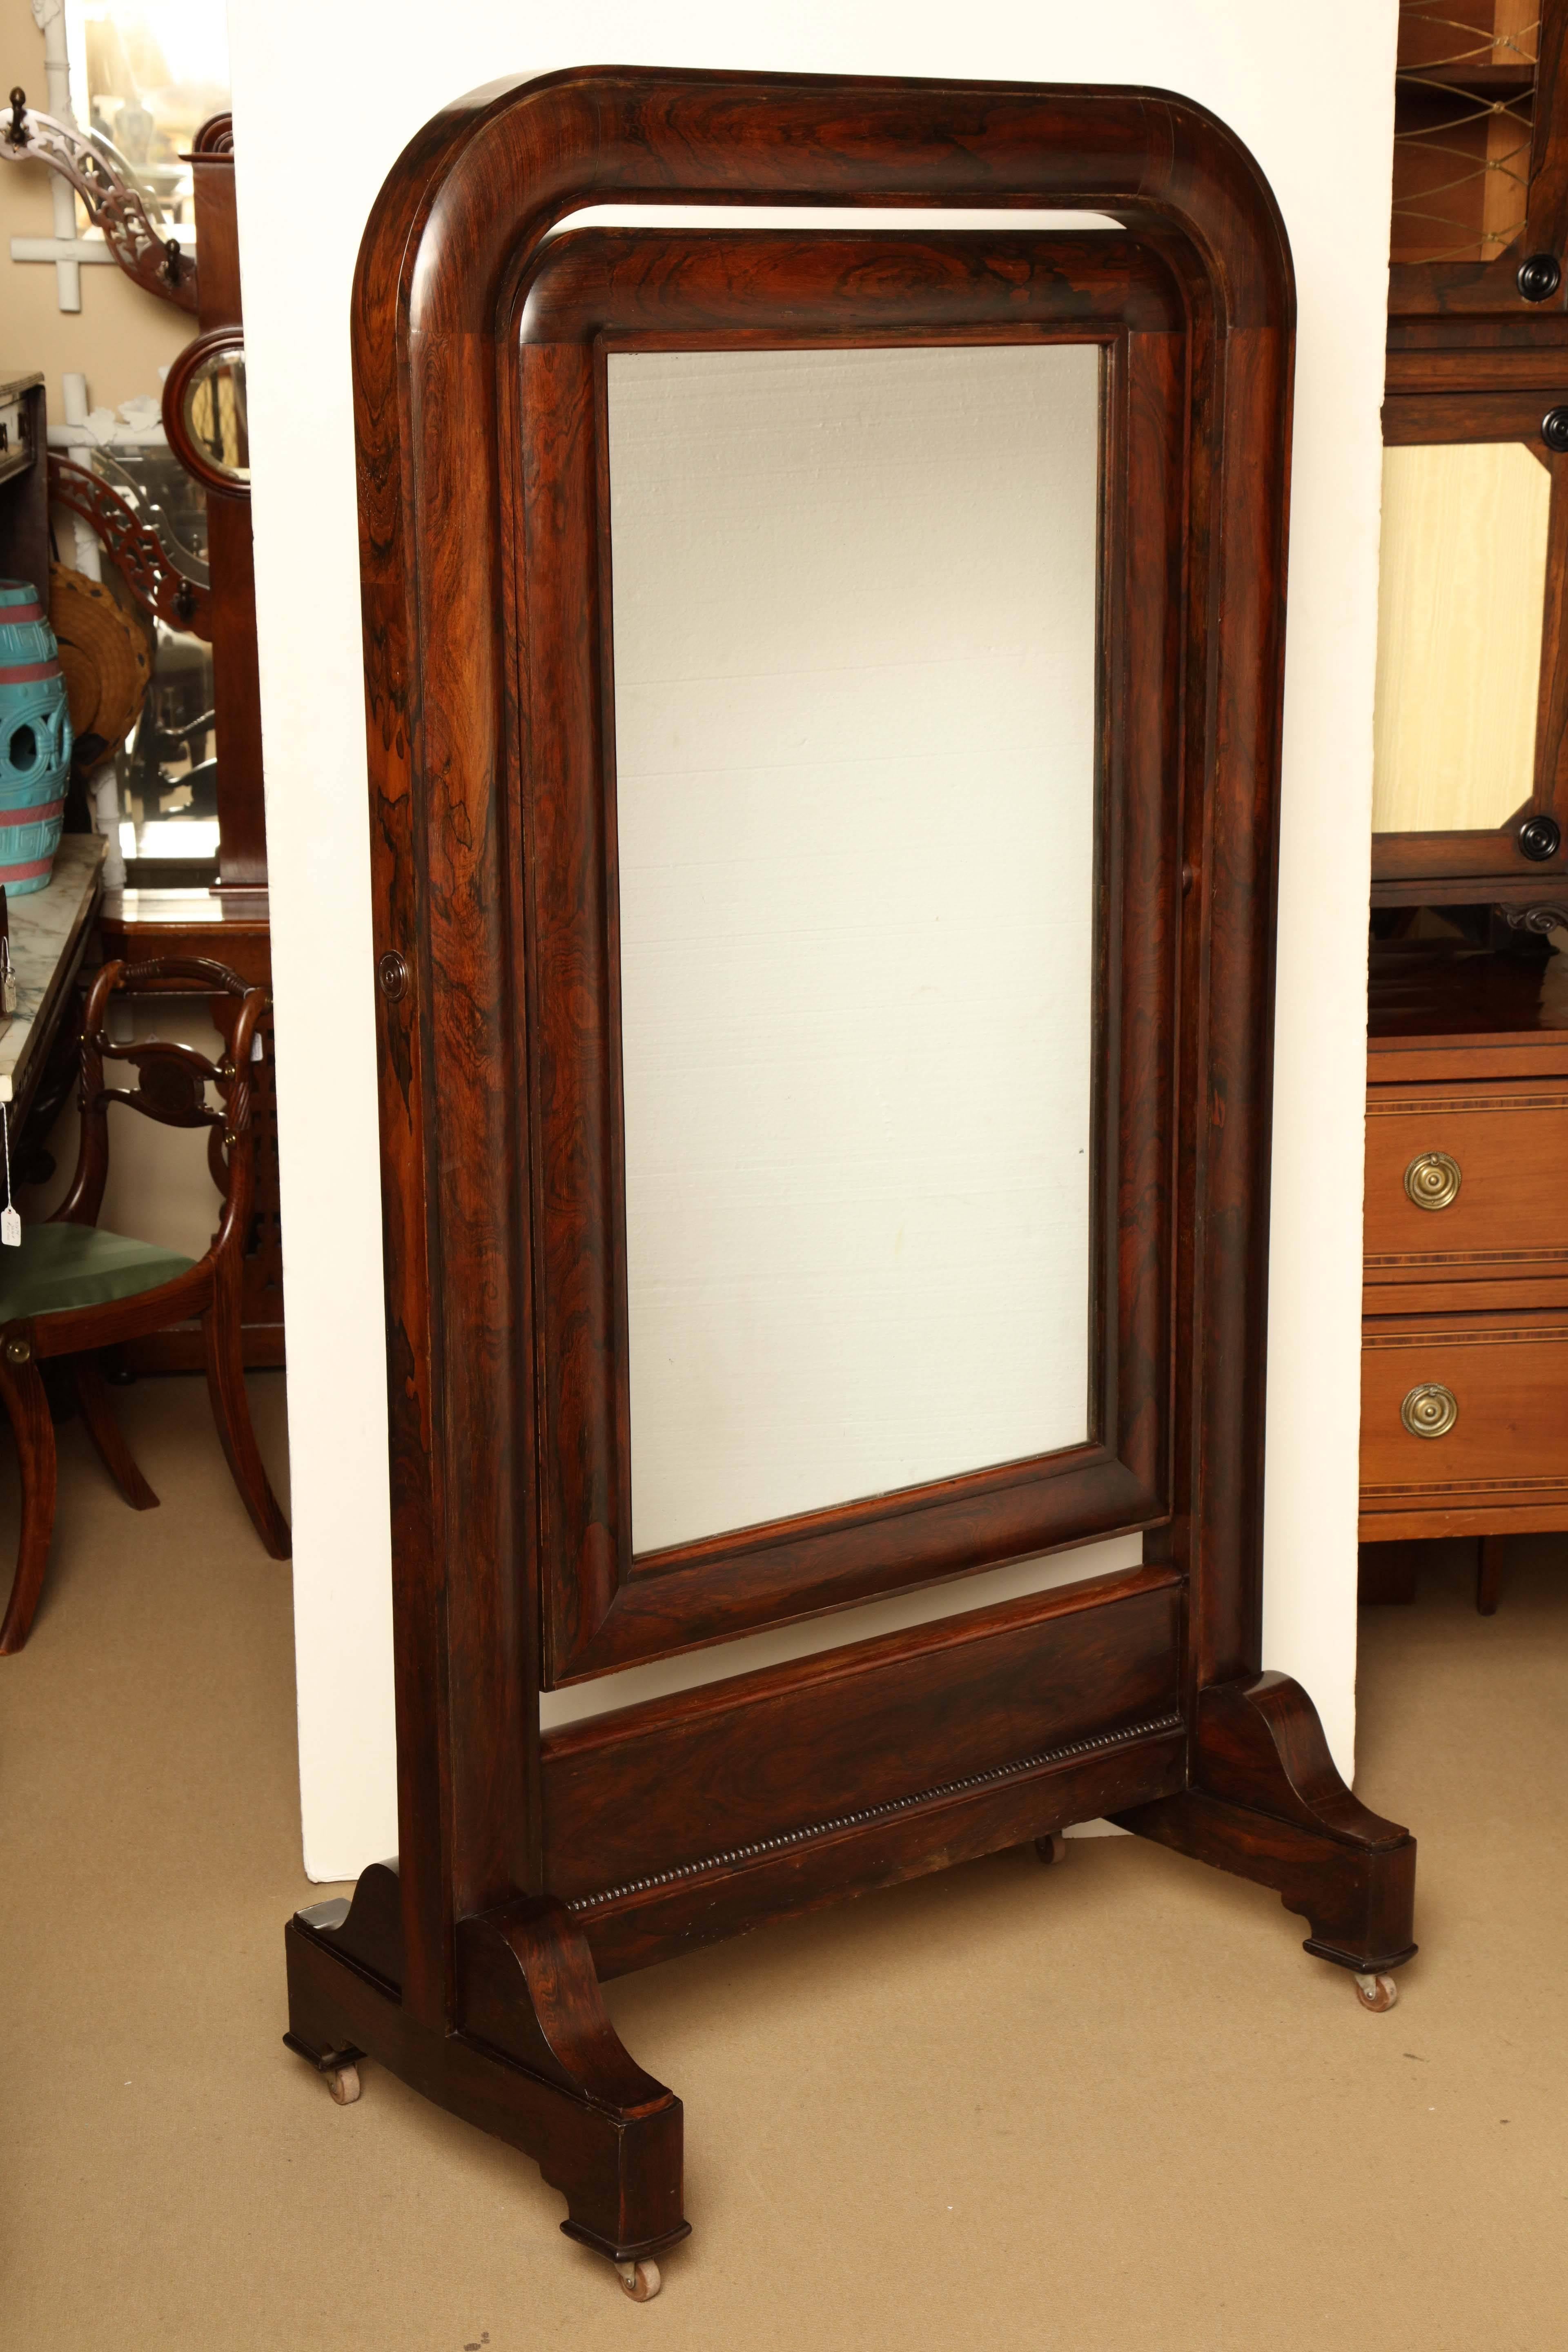 Early 19th century English, William IV cheval mirror.